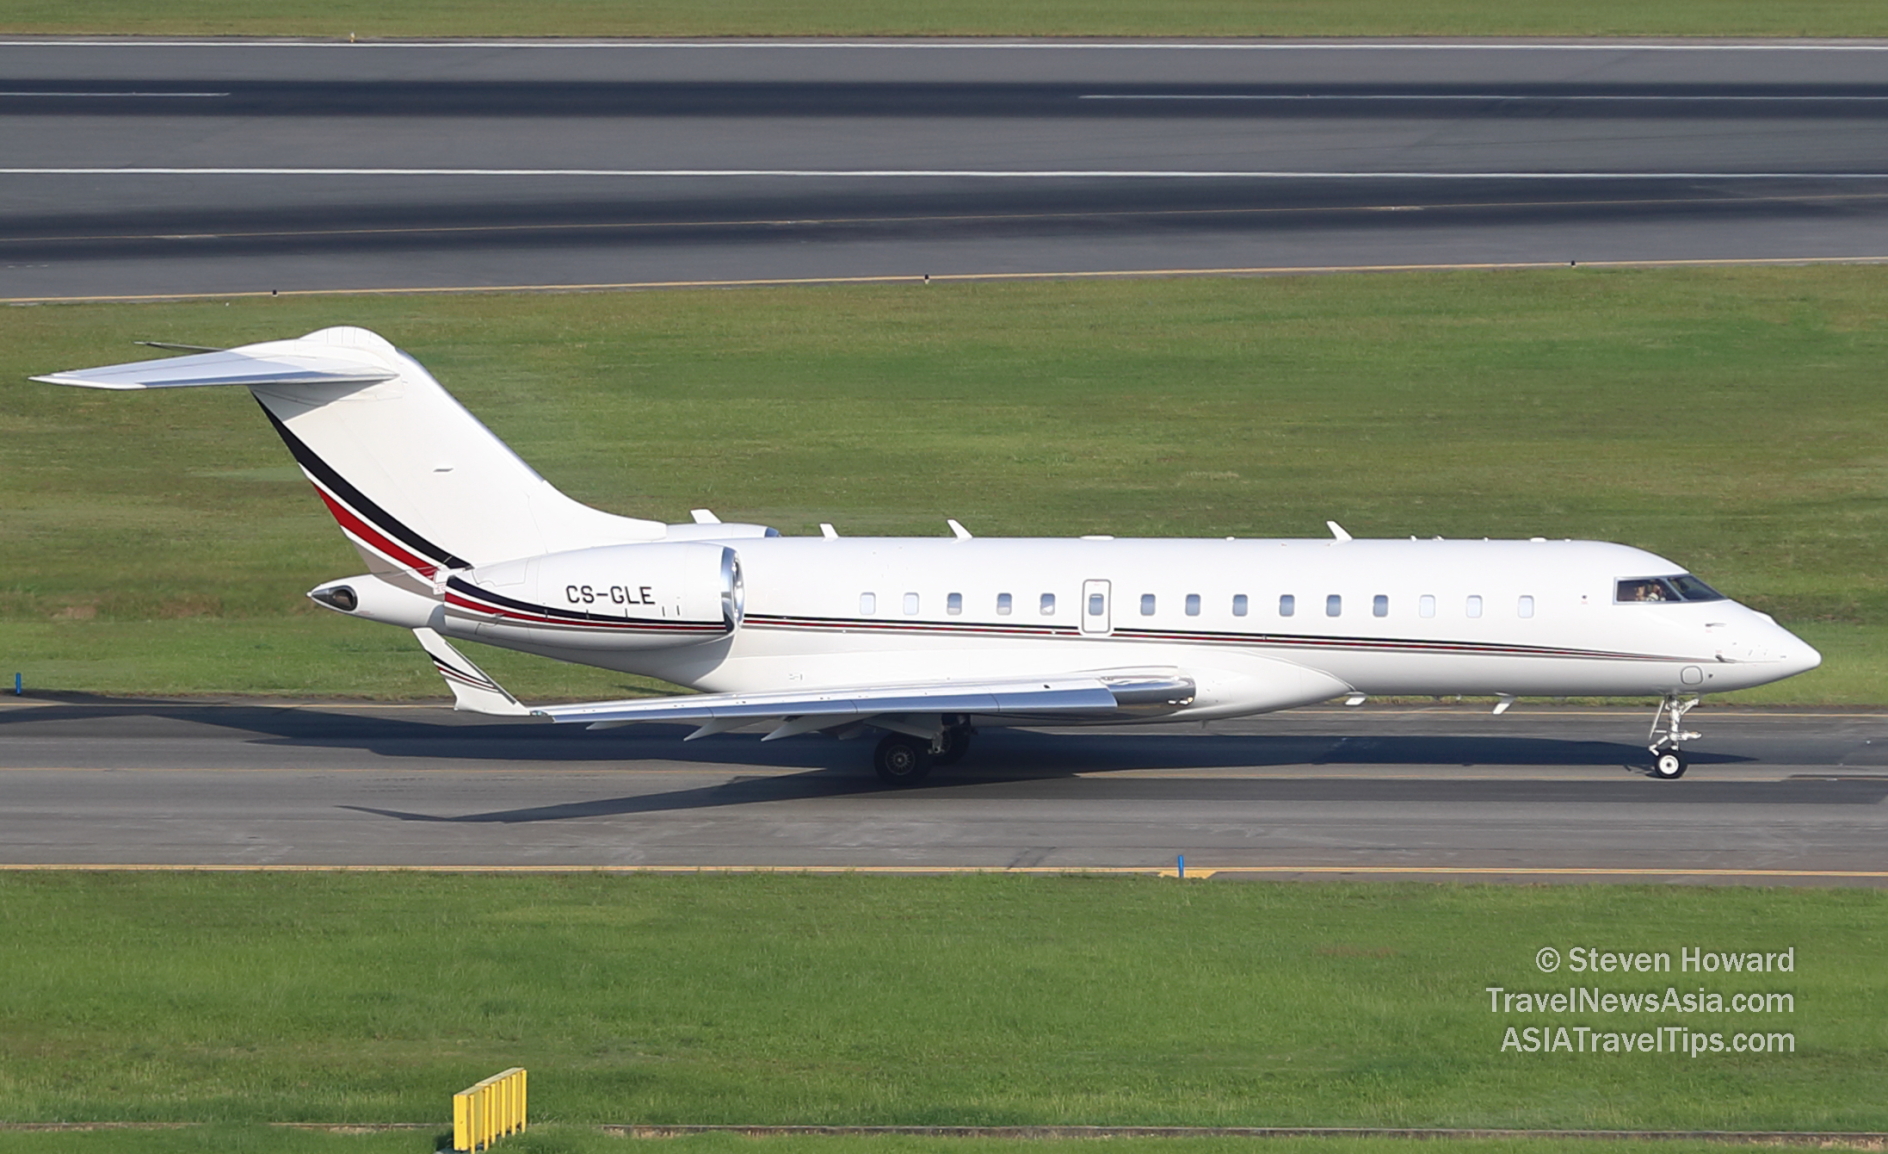 Bombardier Global 6000 reg: CS-GLE at Changi. Picture by Steven Howard of TravelNewsAsia.com Click to enlarge.